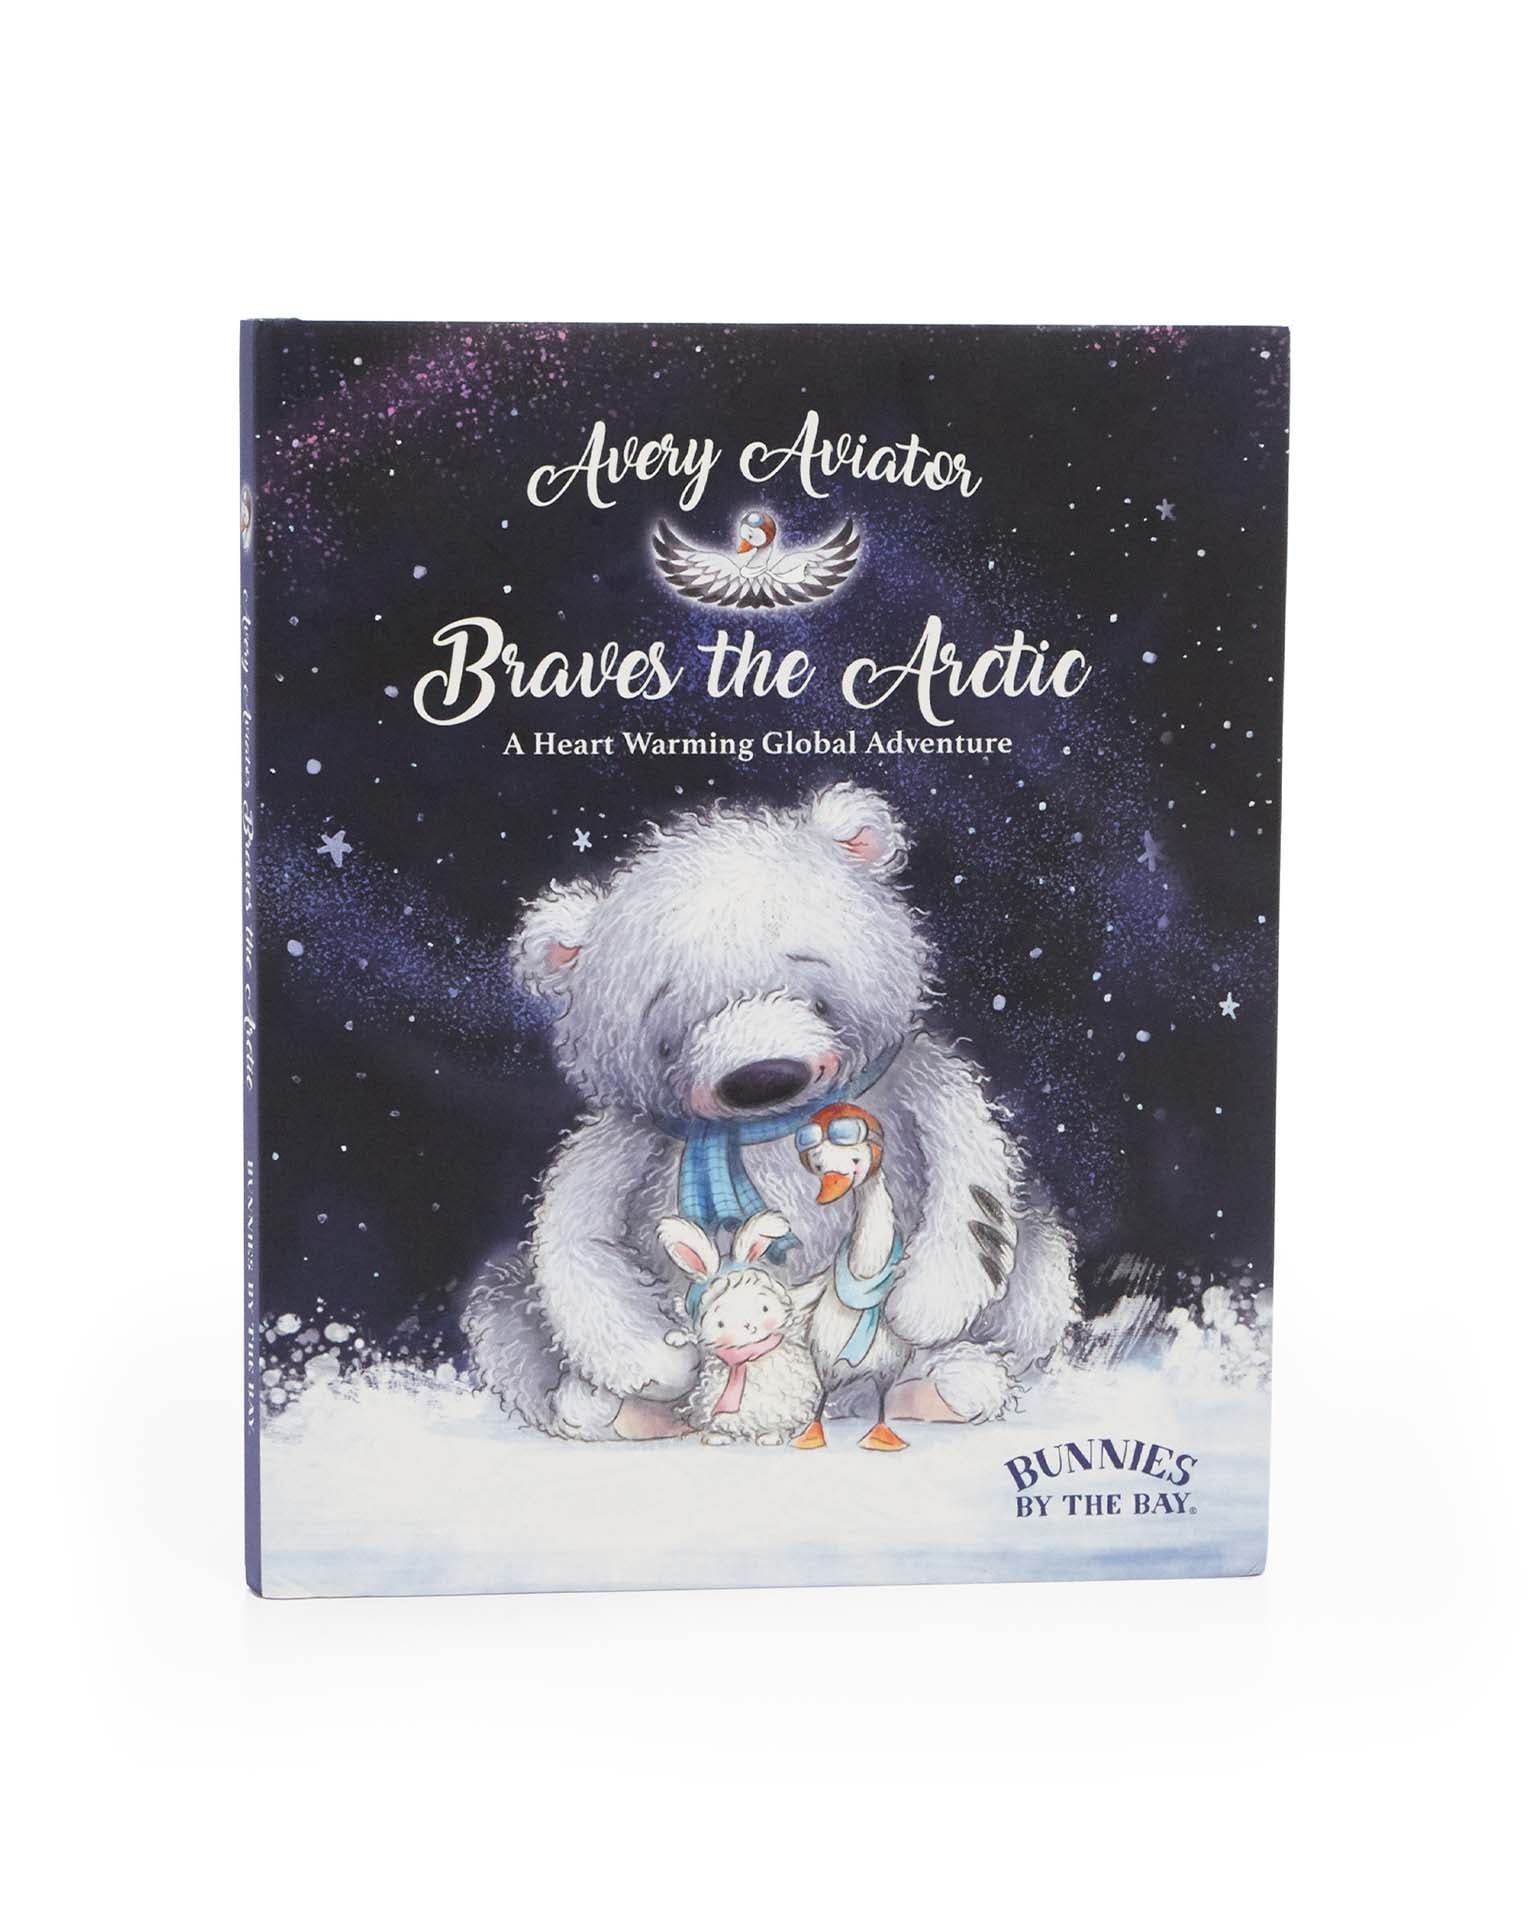 Little bunnies by the bay play avery the aviator braves the arctic story book